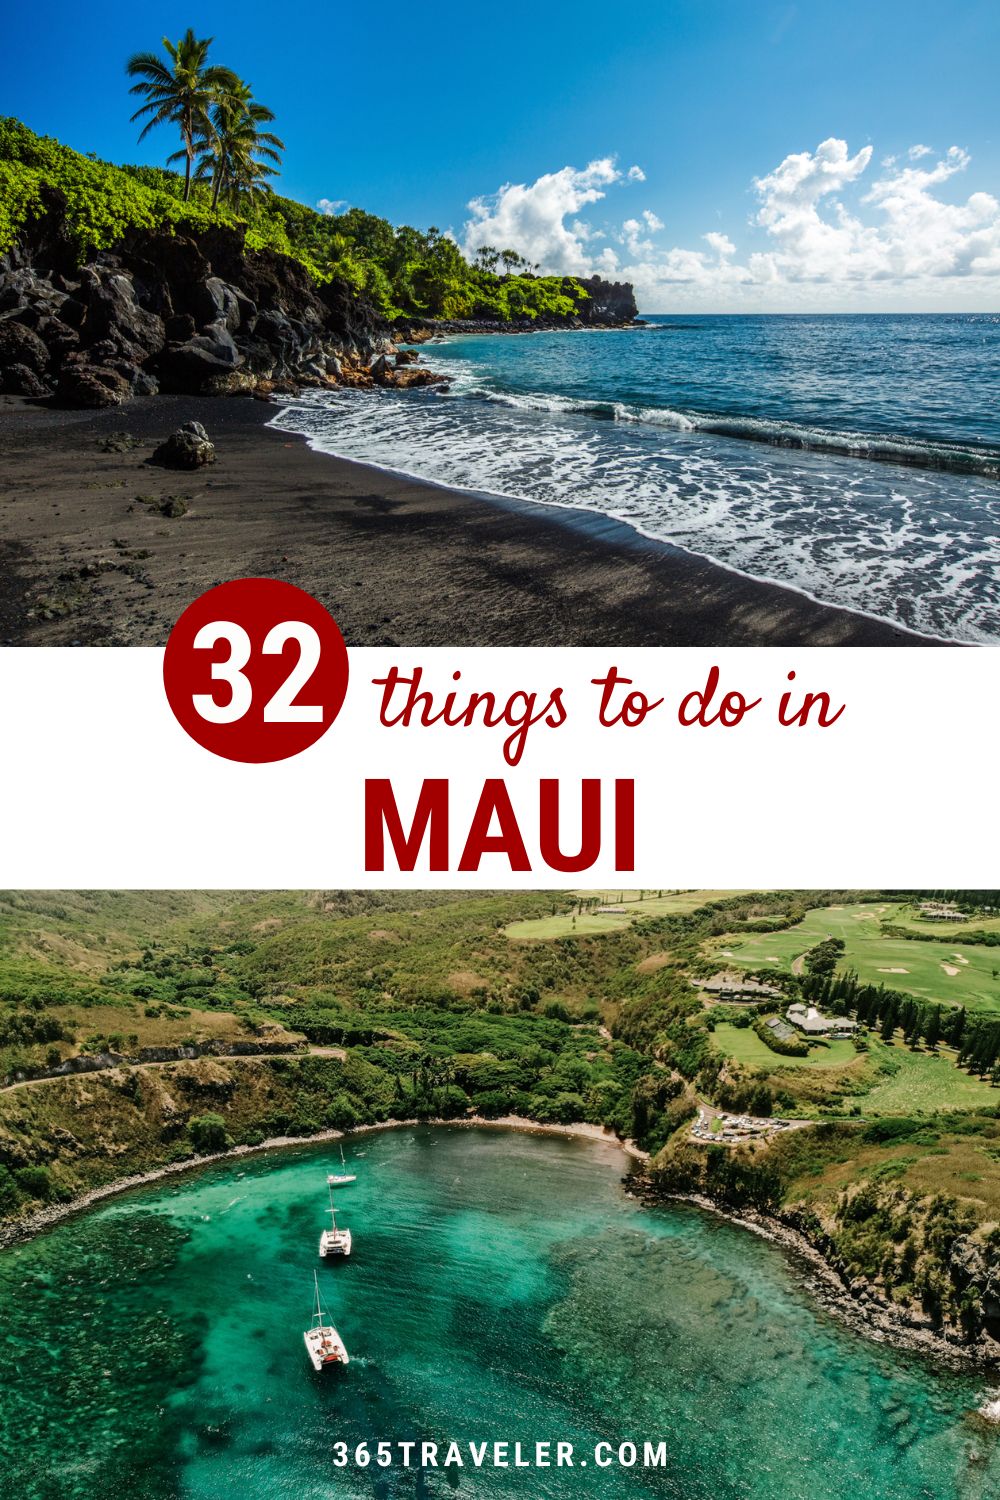 32 Best Things To Do in Maui: From the Mountains to the Sea